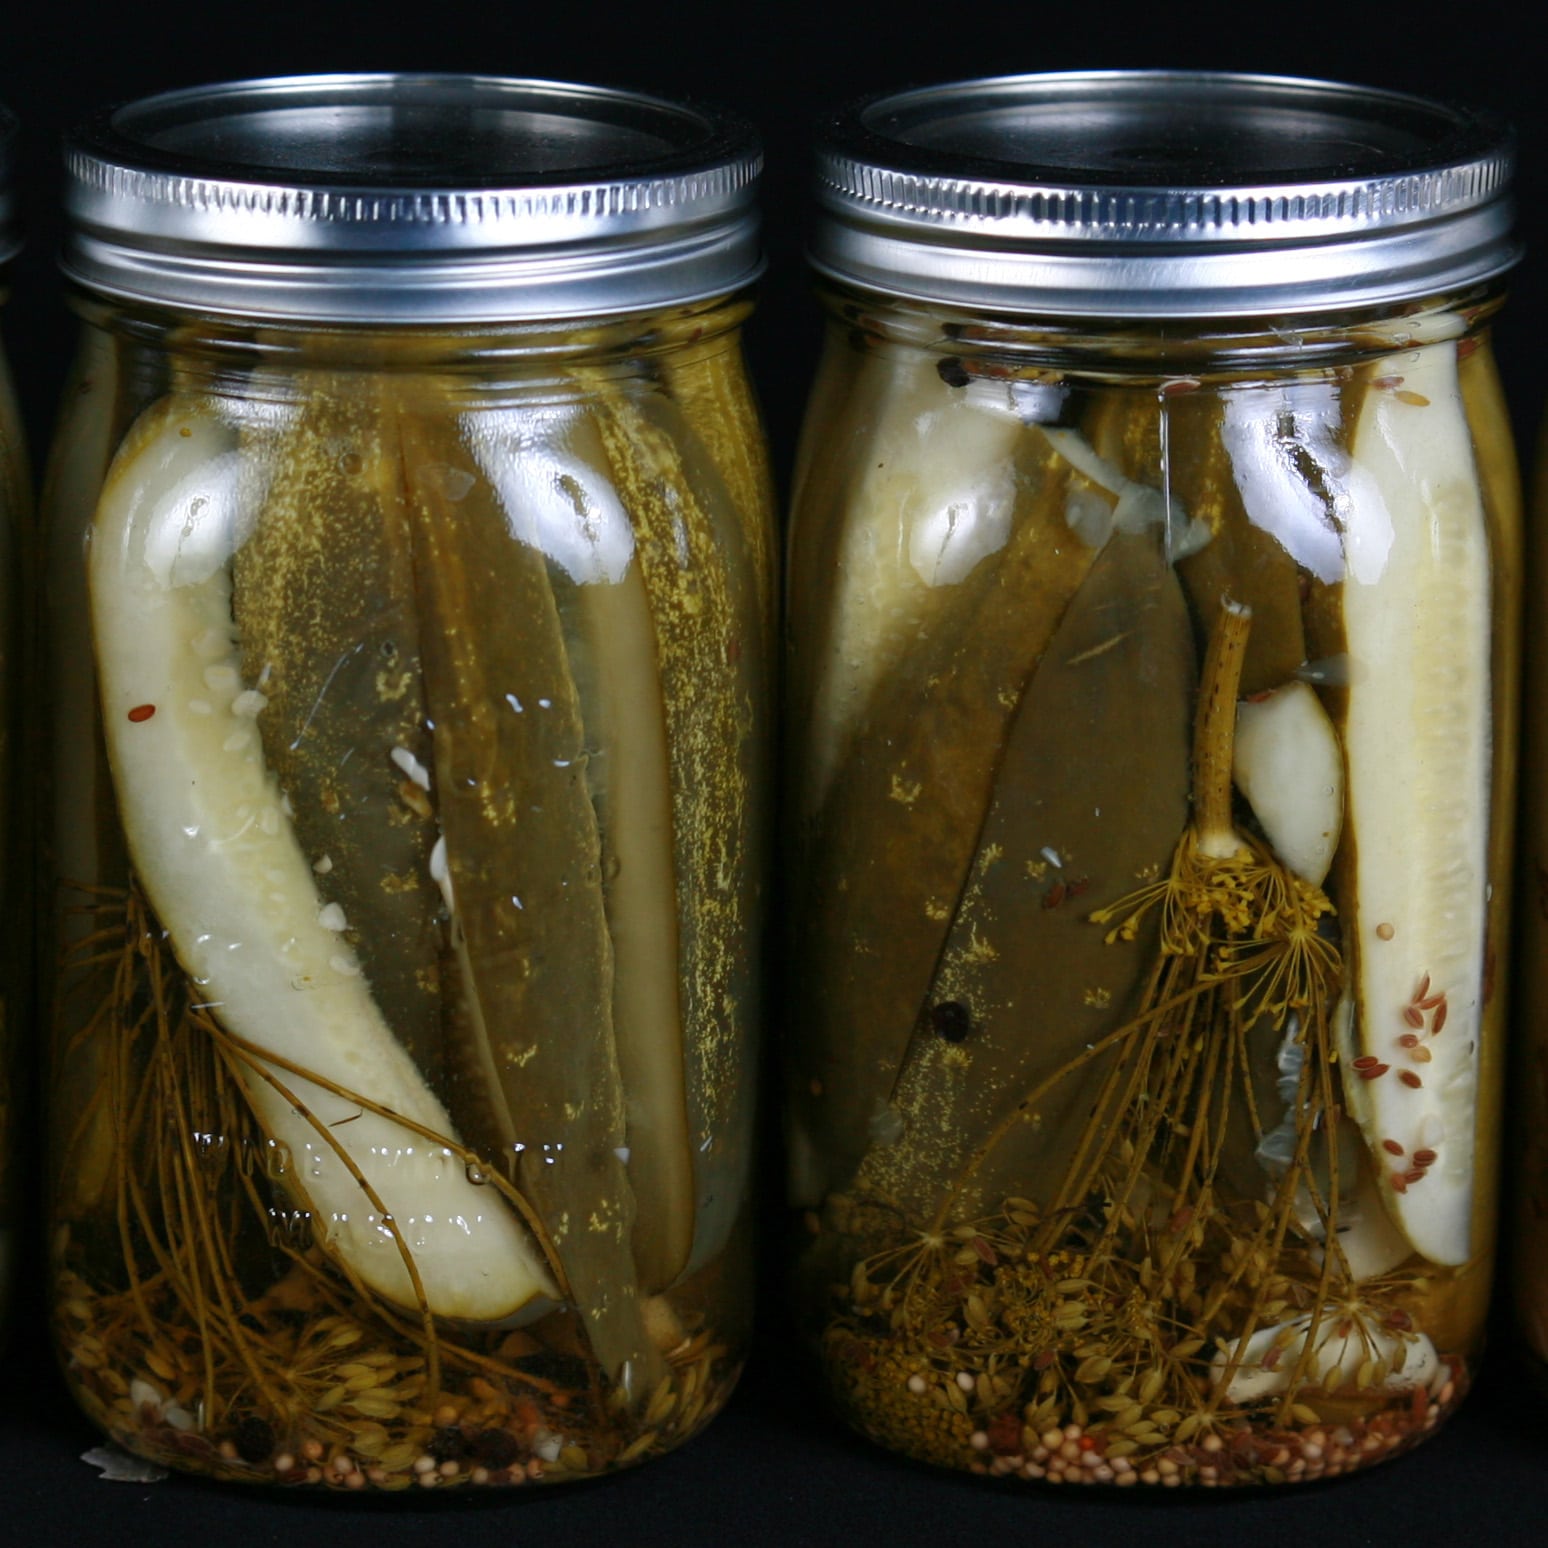 2 large jars of homemade dill pickles.